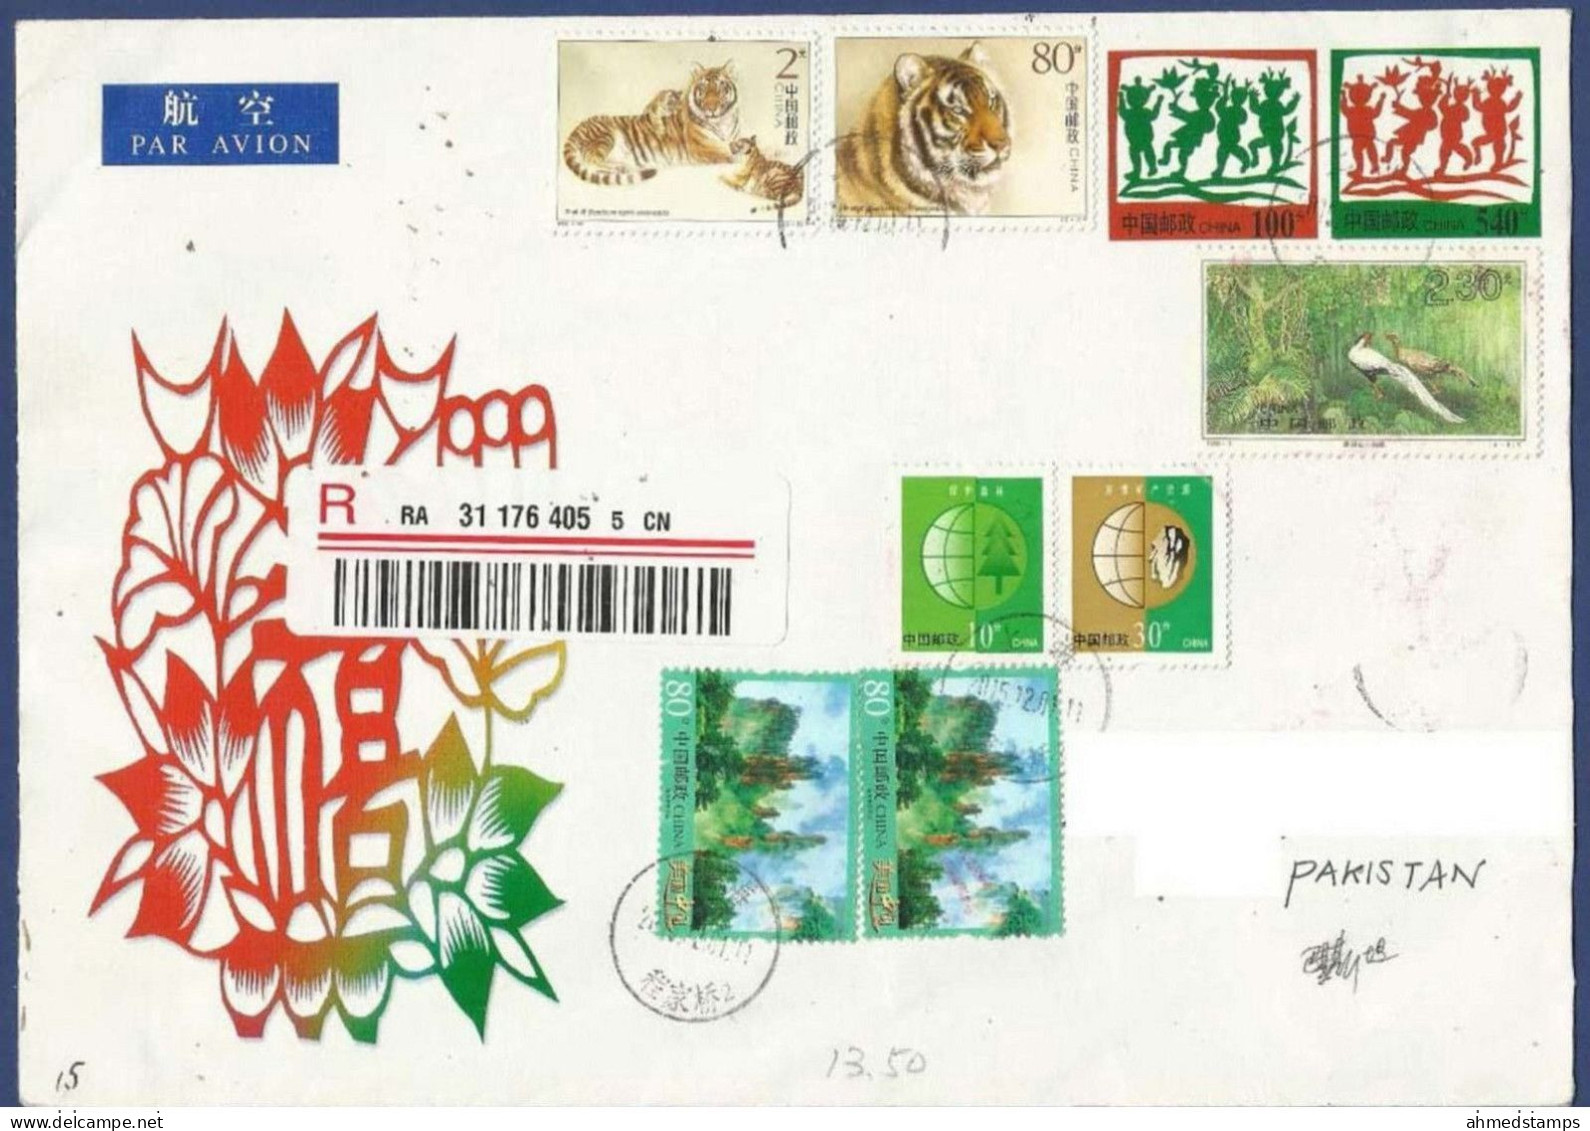 CHINA  REGISTERED POSTAL USED AIRMAIL COVER TO PAKISTAN - Poste Aérienne